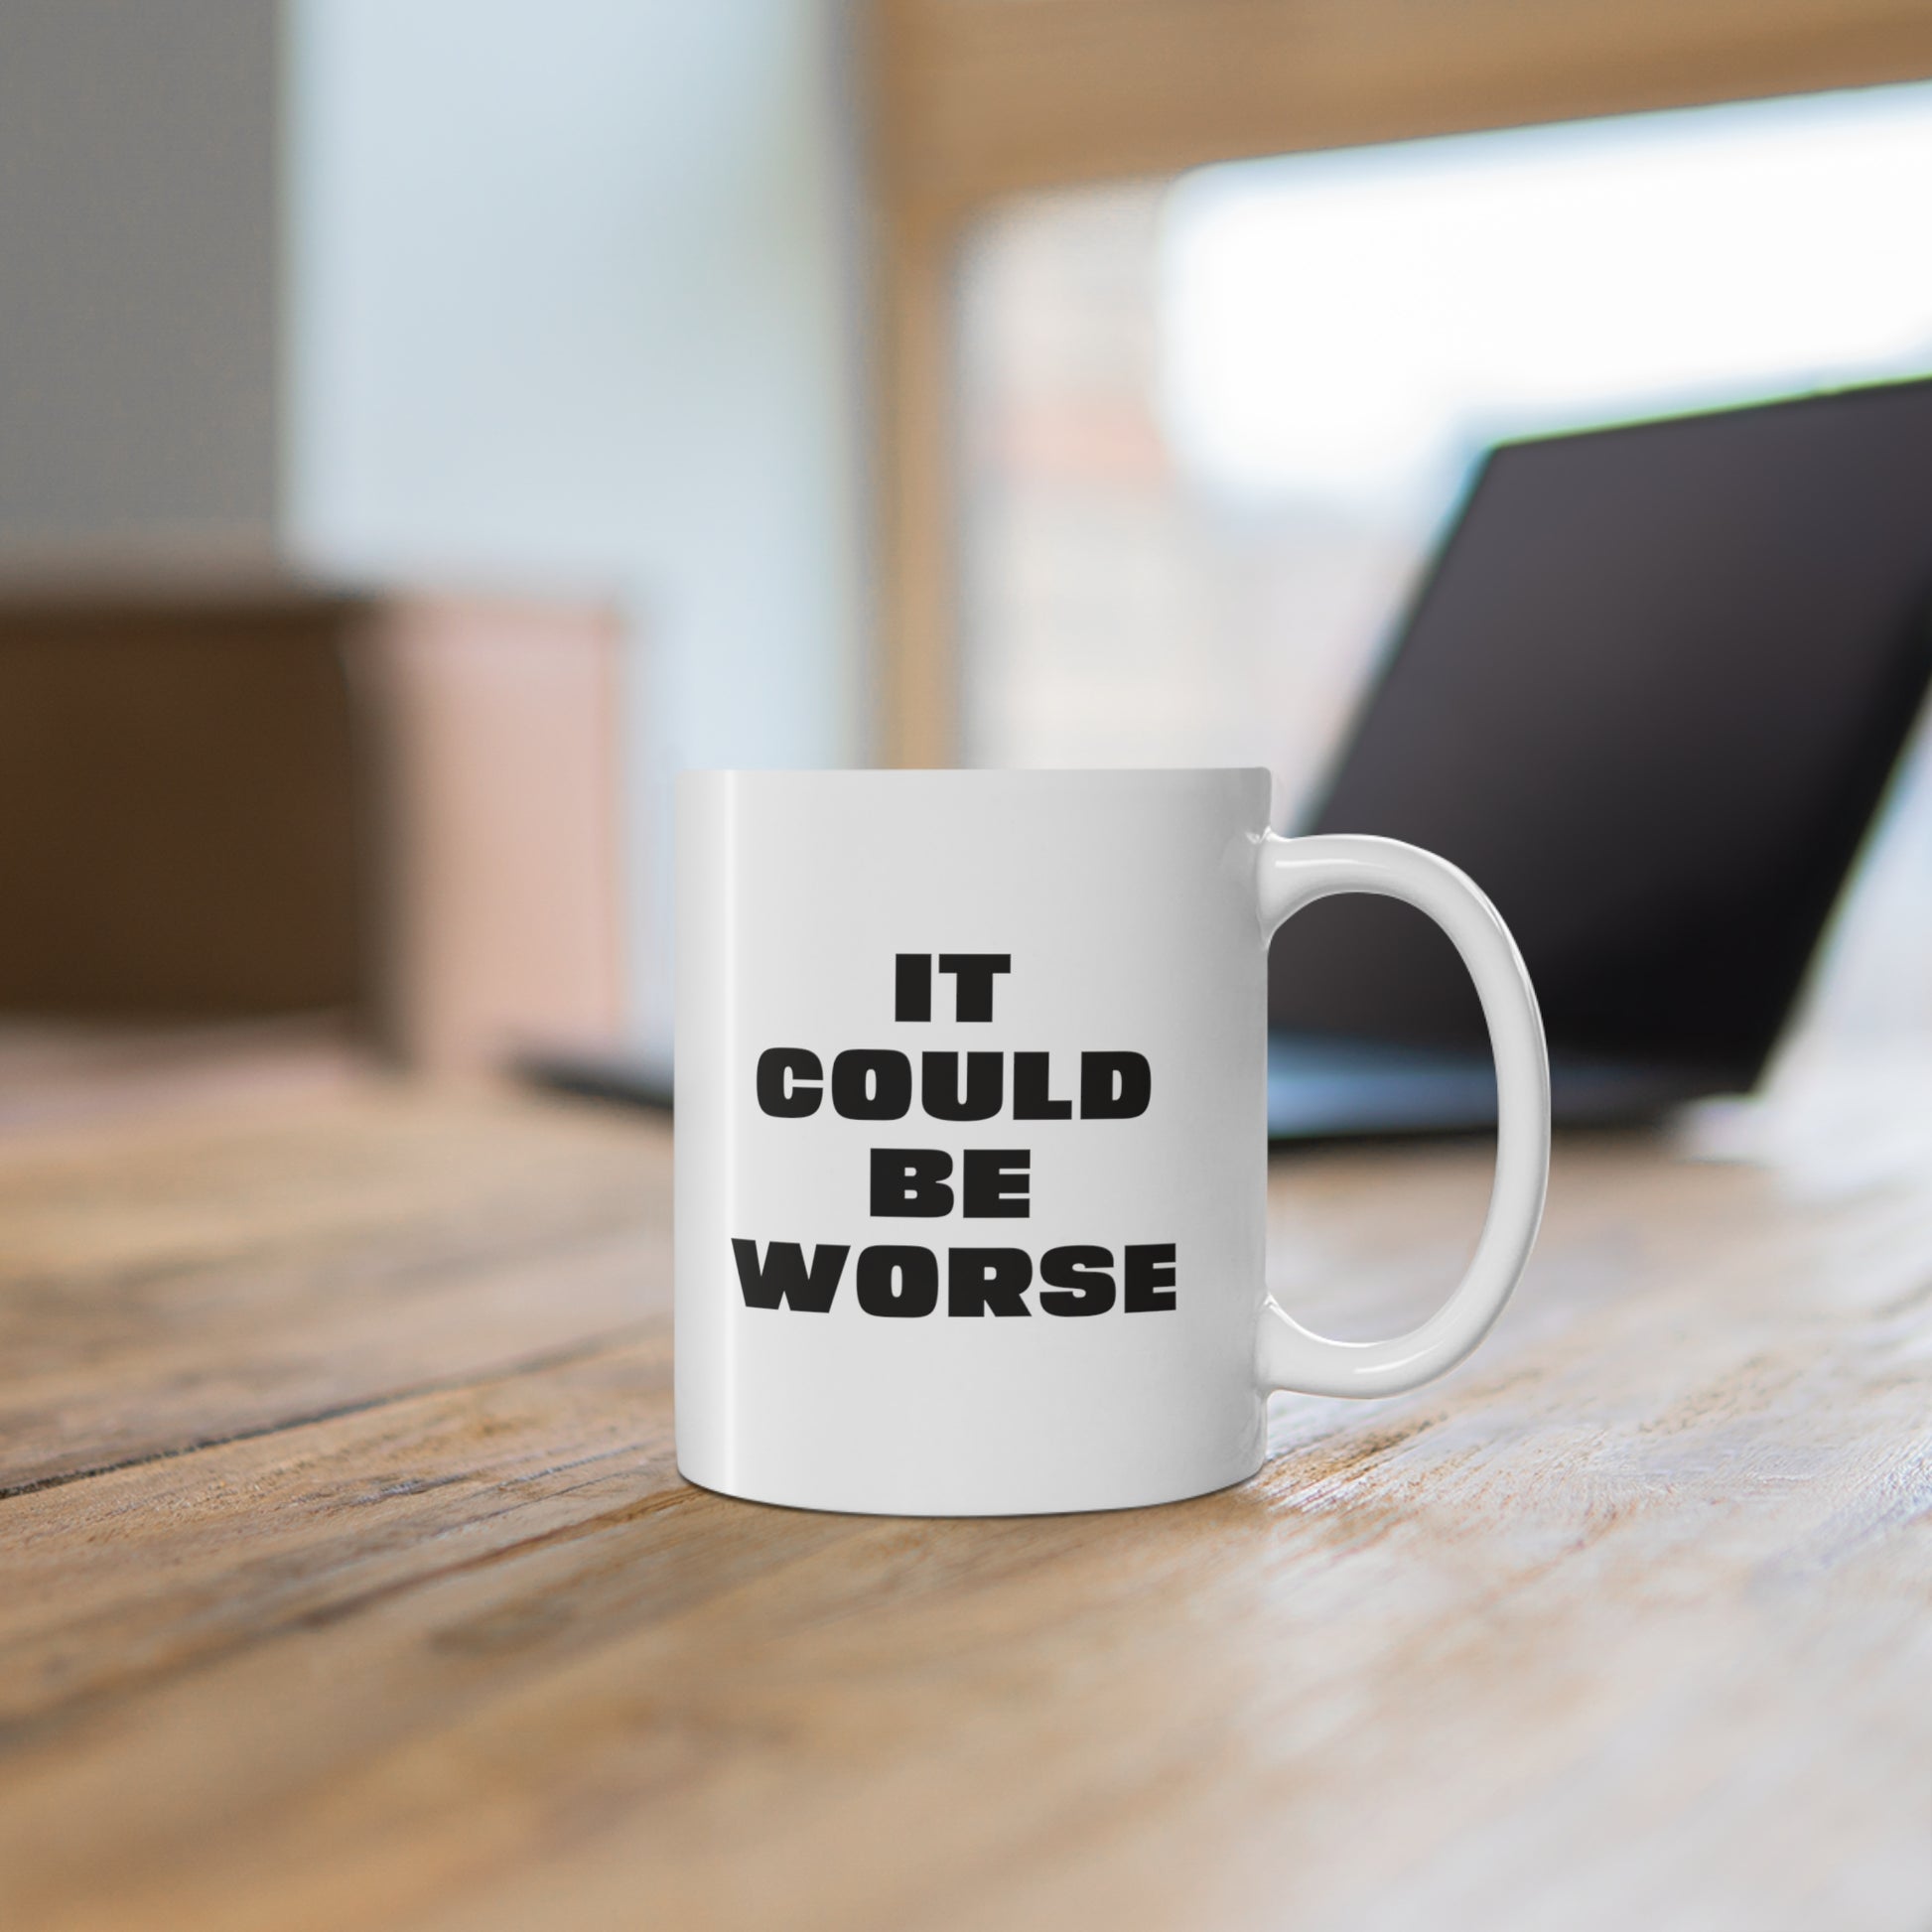 11oz ceramic mug with quote It Could Be Worse